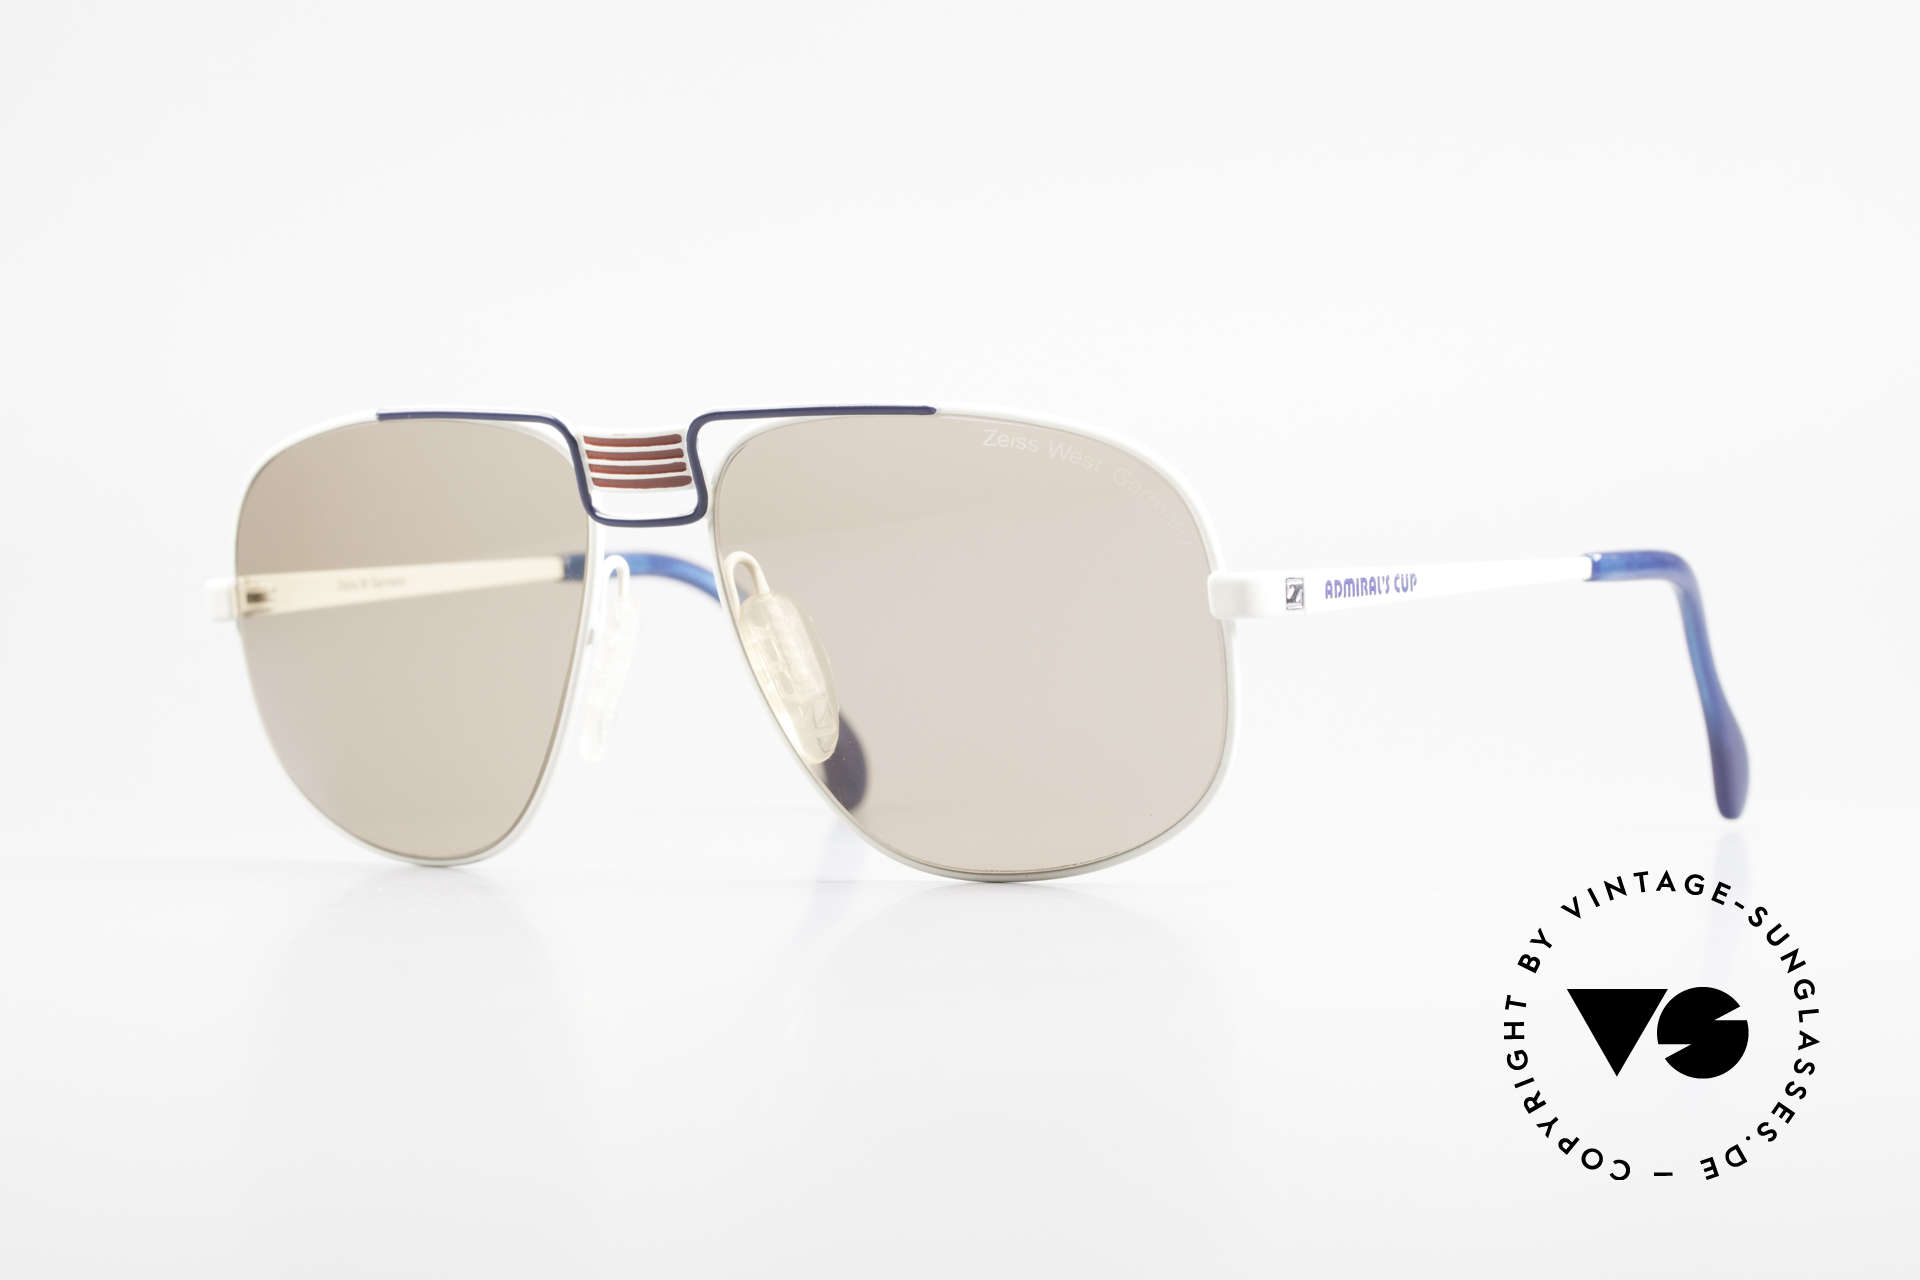 Zeiss 9387 Admiral's Cup Special Edition, extraordinary 80's sunglasses by Zeiss, W.Germany, Made for Men